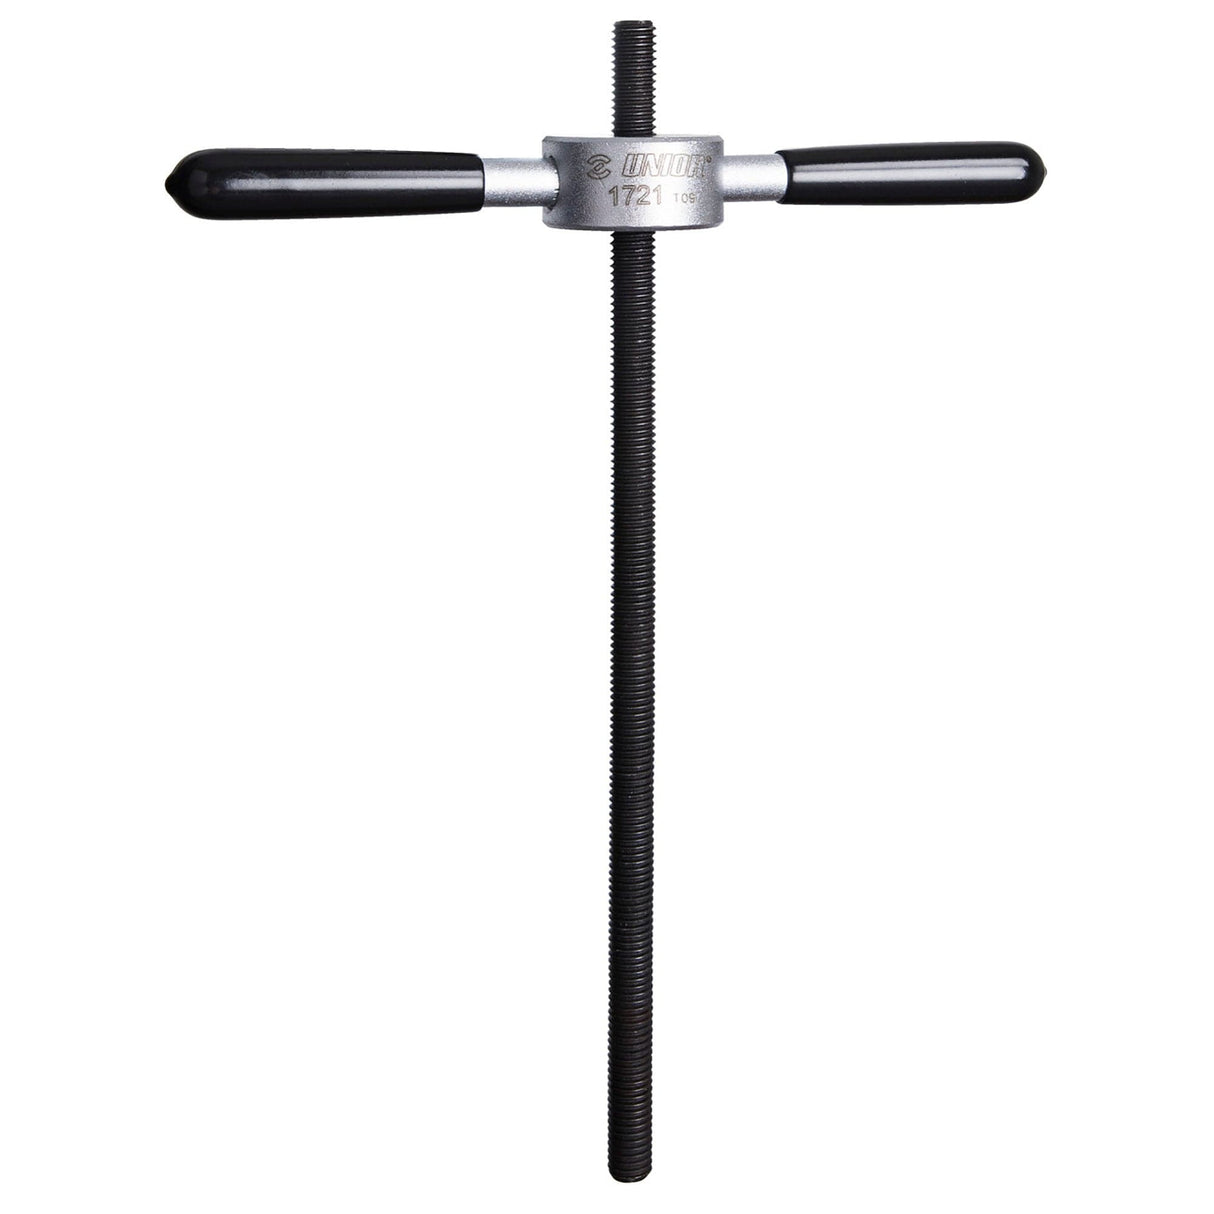 Unior Handle With Threaded Rod For Bearing Press Kit 1721: